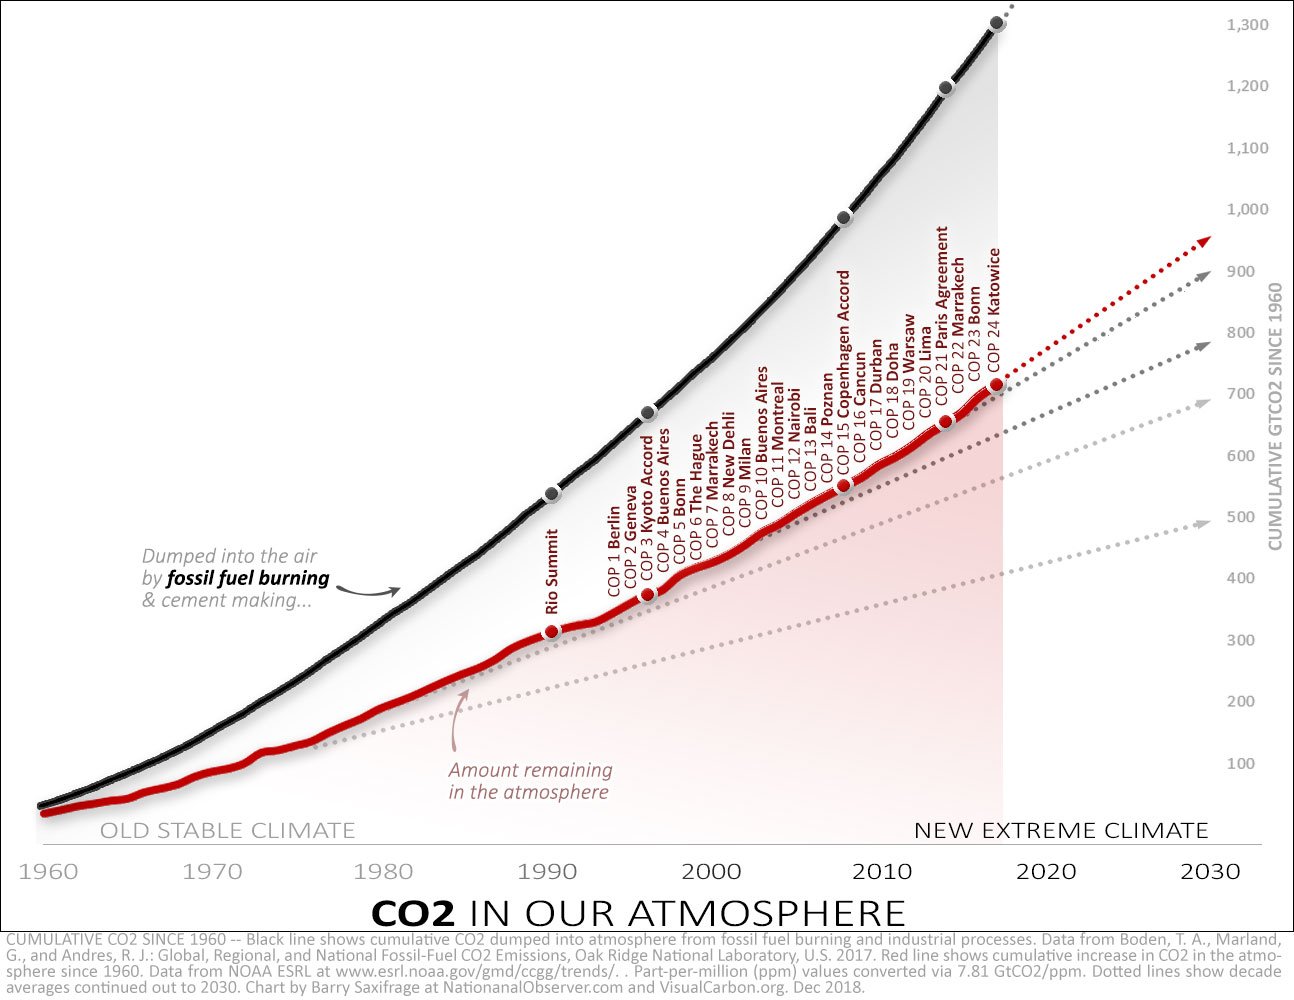 Cumulative fossil fuel CO2 since 1960. Red line shows amount remaining in the atmosphere. Annotated with UN COP years.